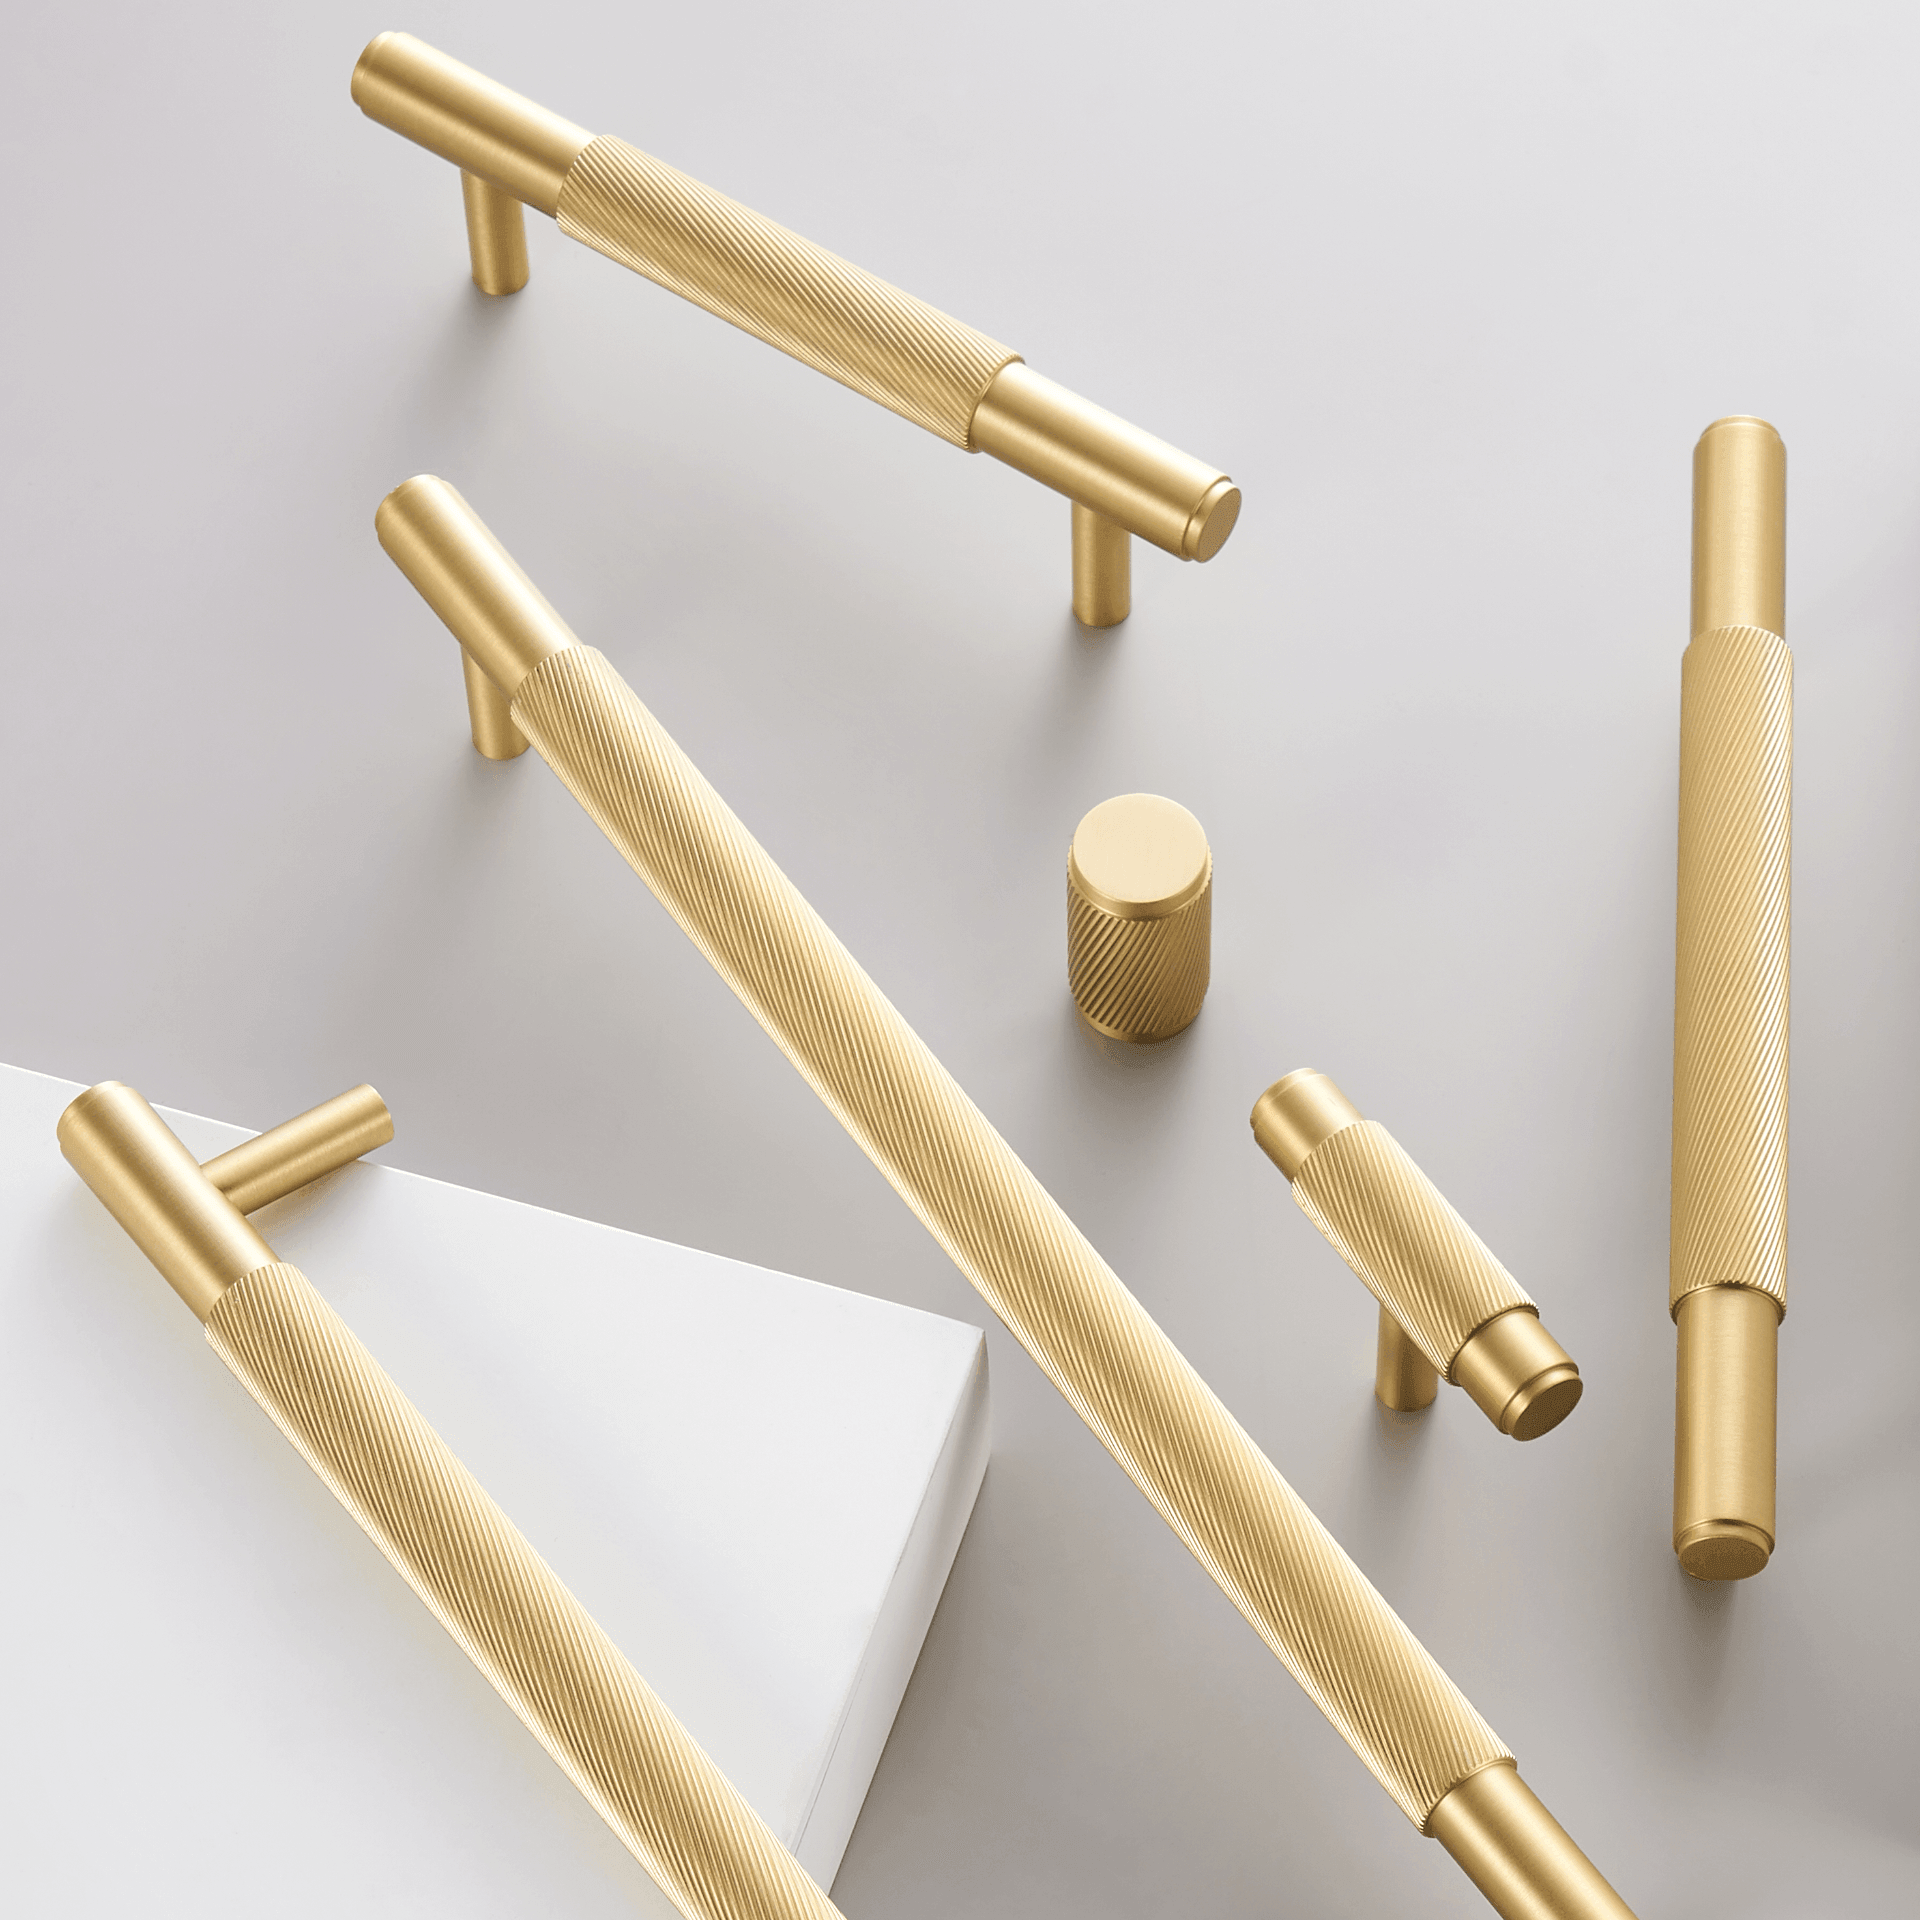 PALENCIA / SOLID BRASS HANDLES / SWIRLED KNURL - Handle Shop Couture 